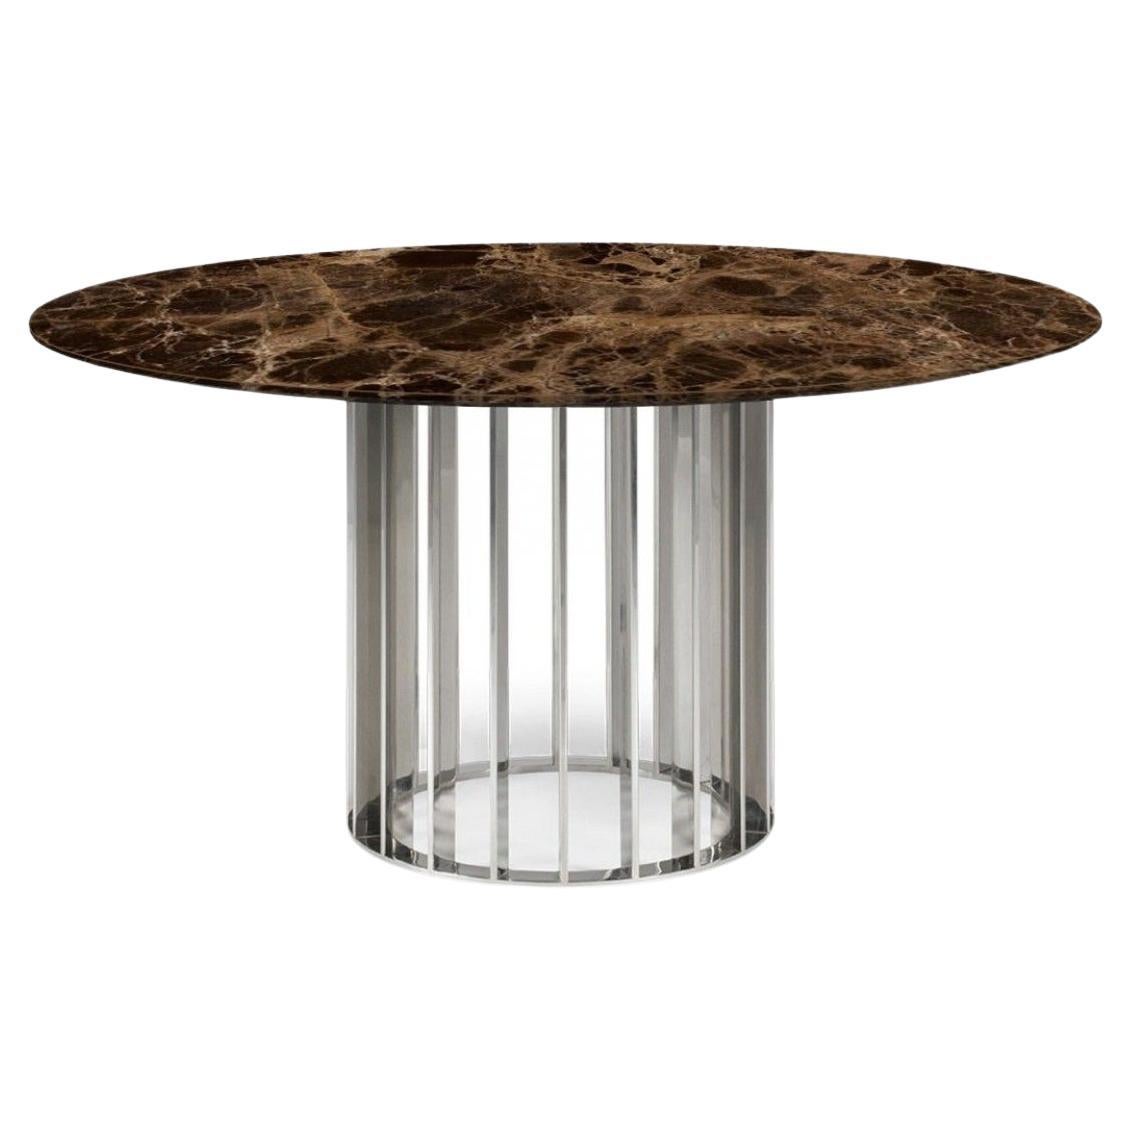 Portuguese Black Marble Stainless Steel Dining Table For Sale